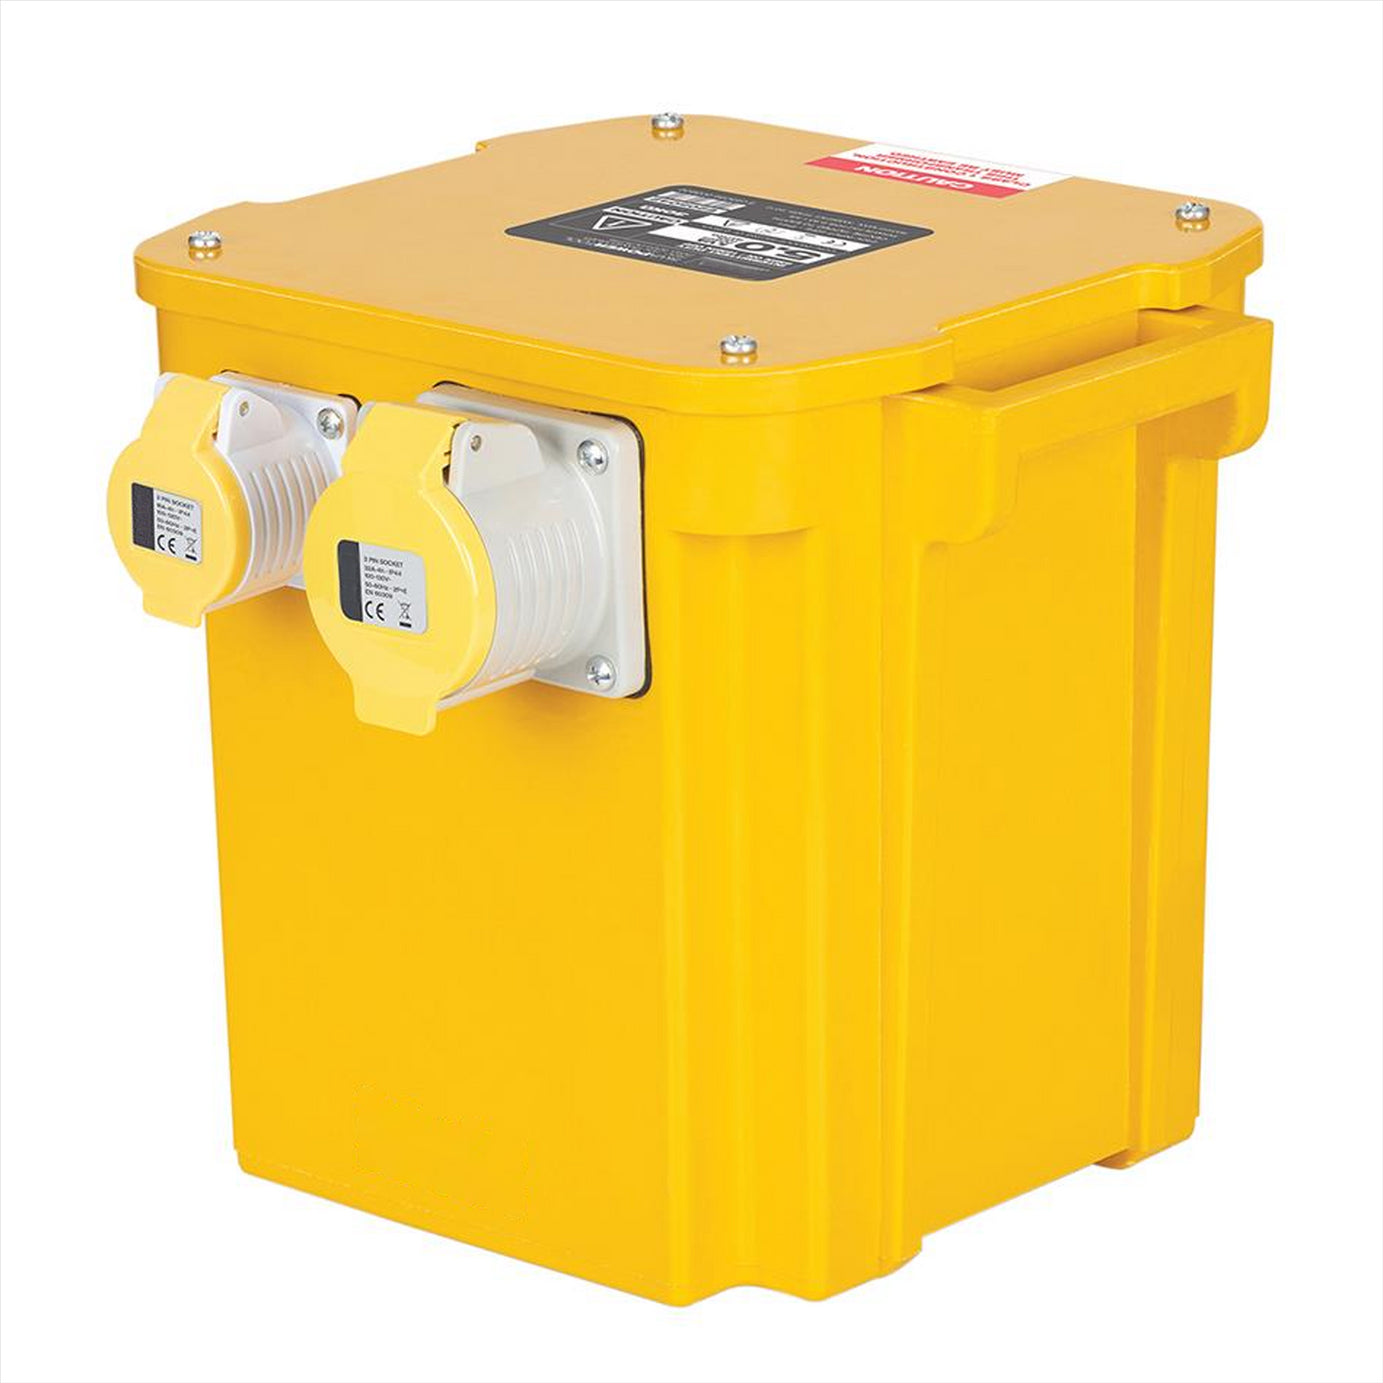 Resettable Thermal Overload Protection 5kVA Portable Transformer